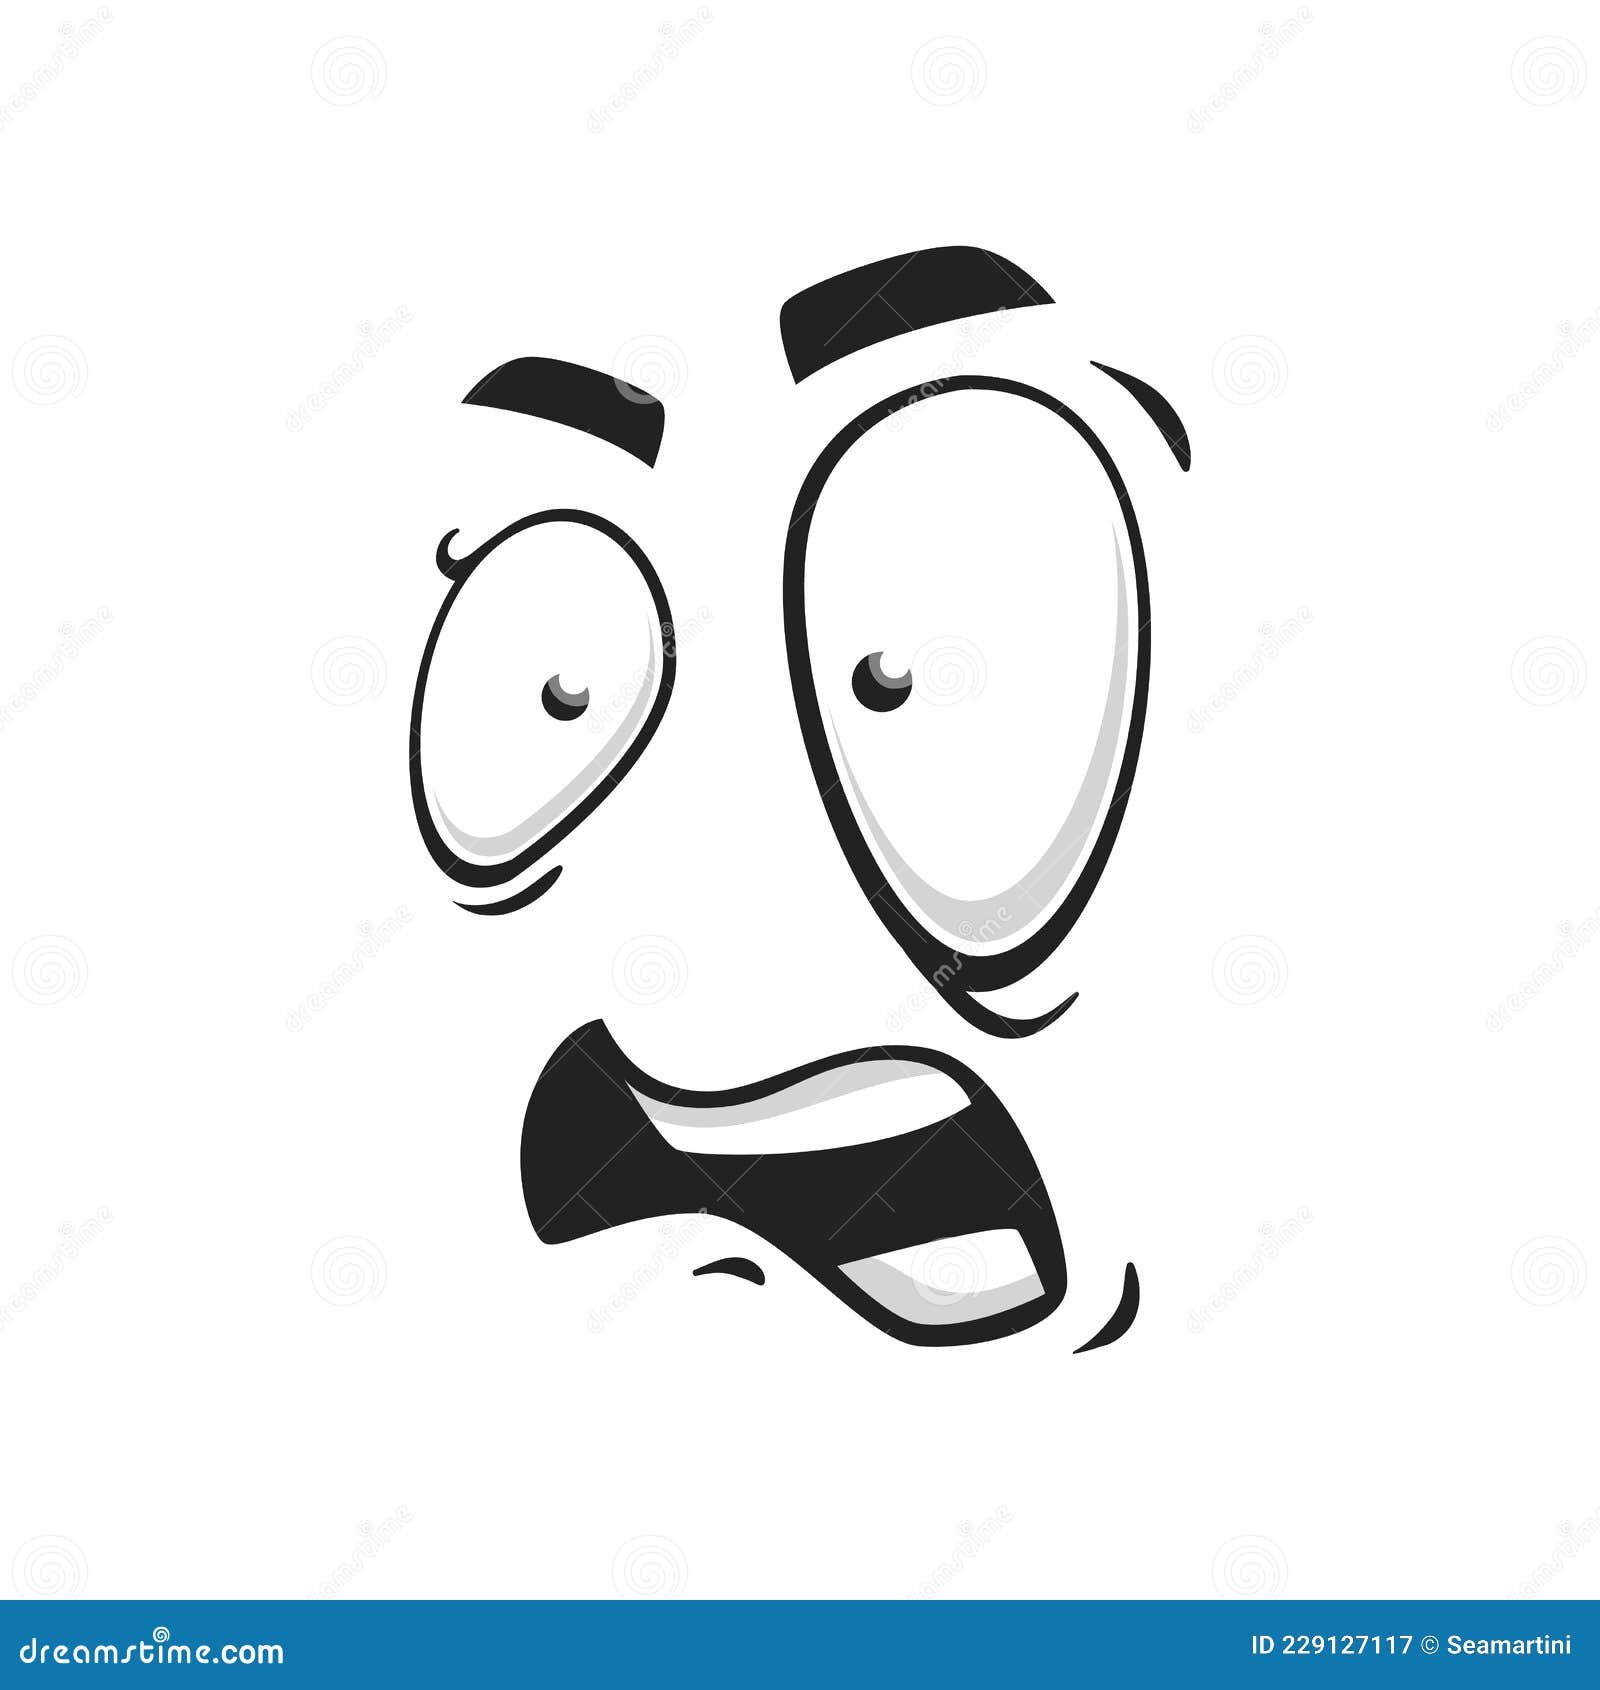 Cartoon face frightened or worry emoji, vector character scared